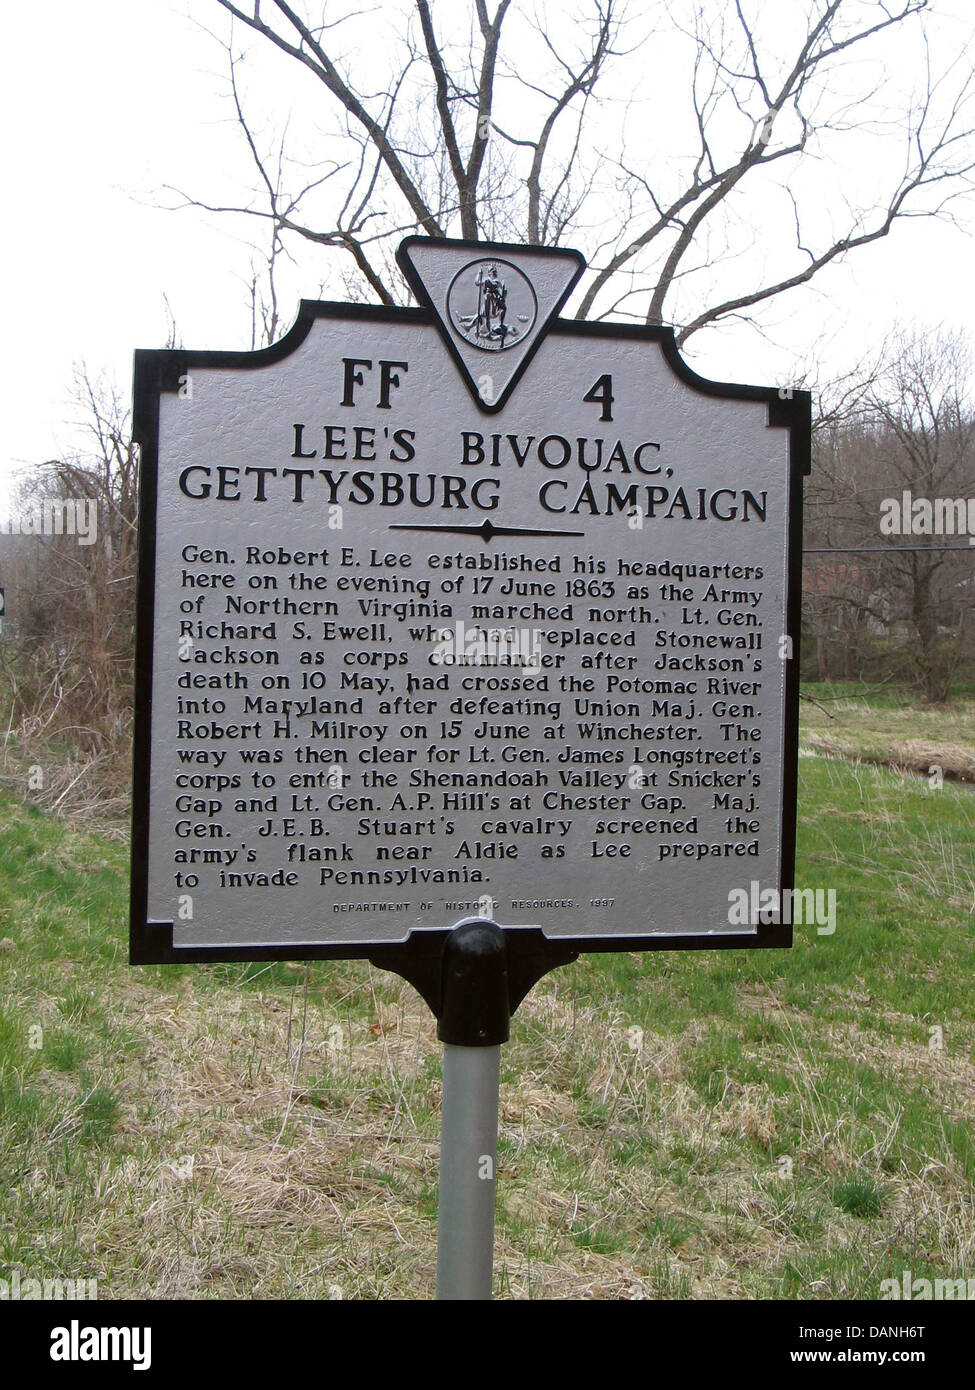 LEE'S BIVOUAC, GETTYSBURG CAMPAIGN  Gen. Robert E. Lee established his headquarters here on the evening of 17 June 1863 as the A Stock Photo